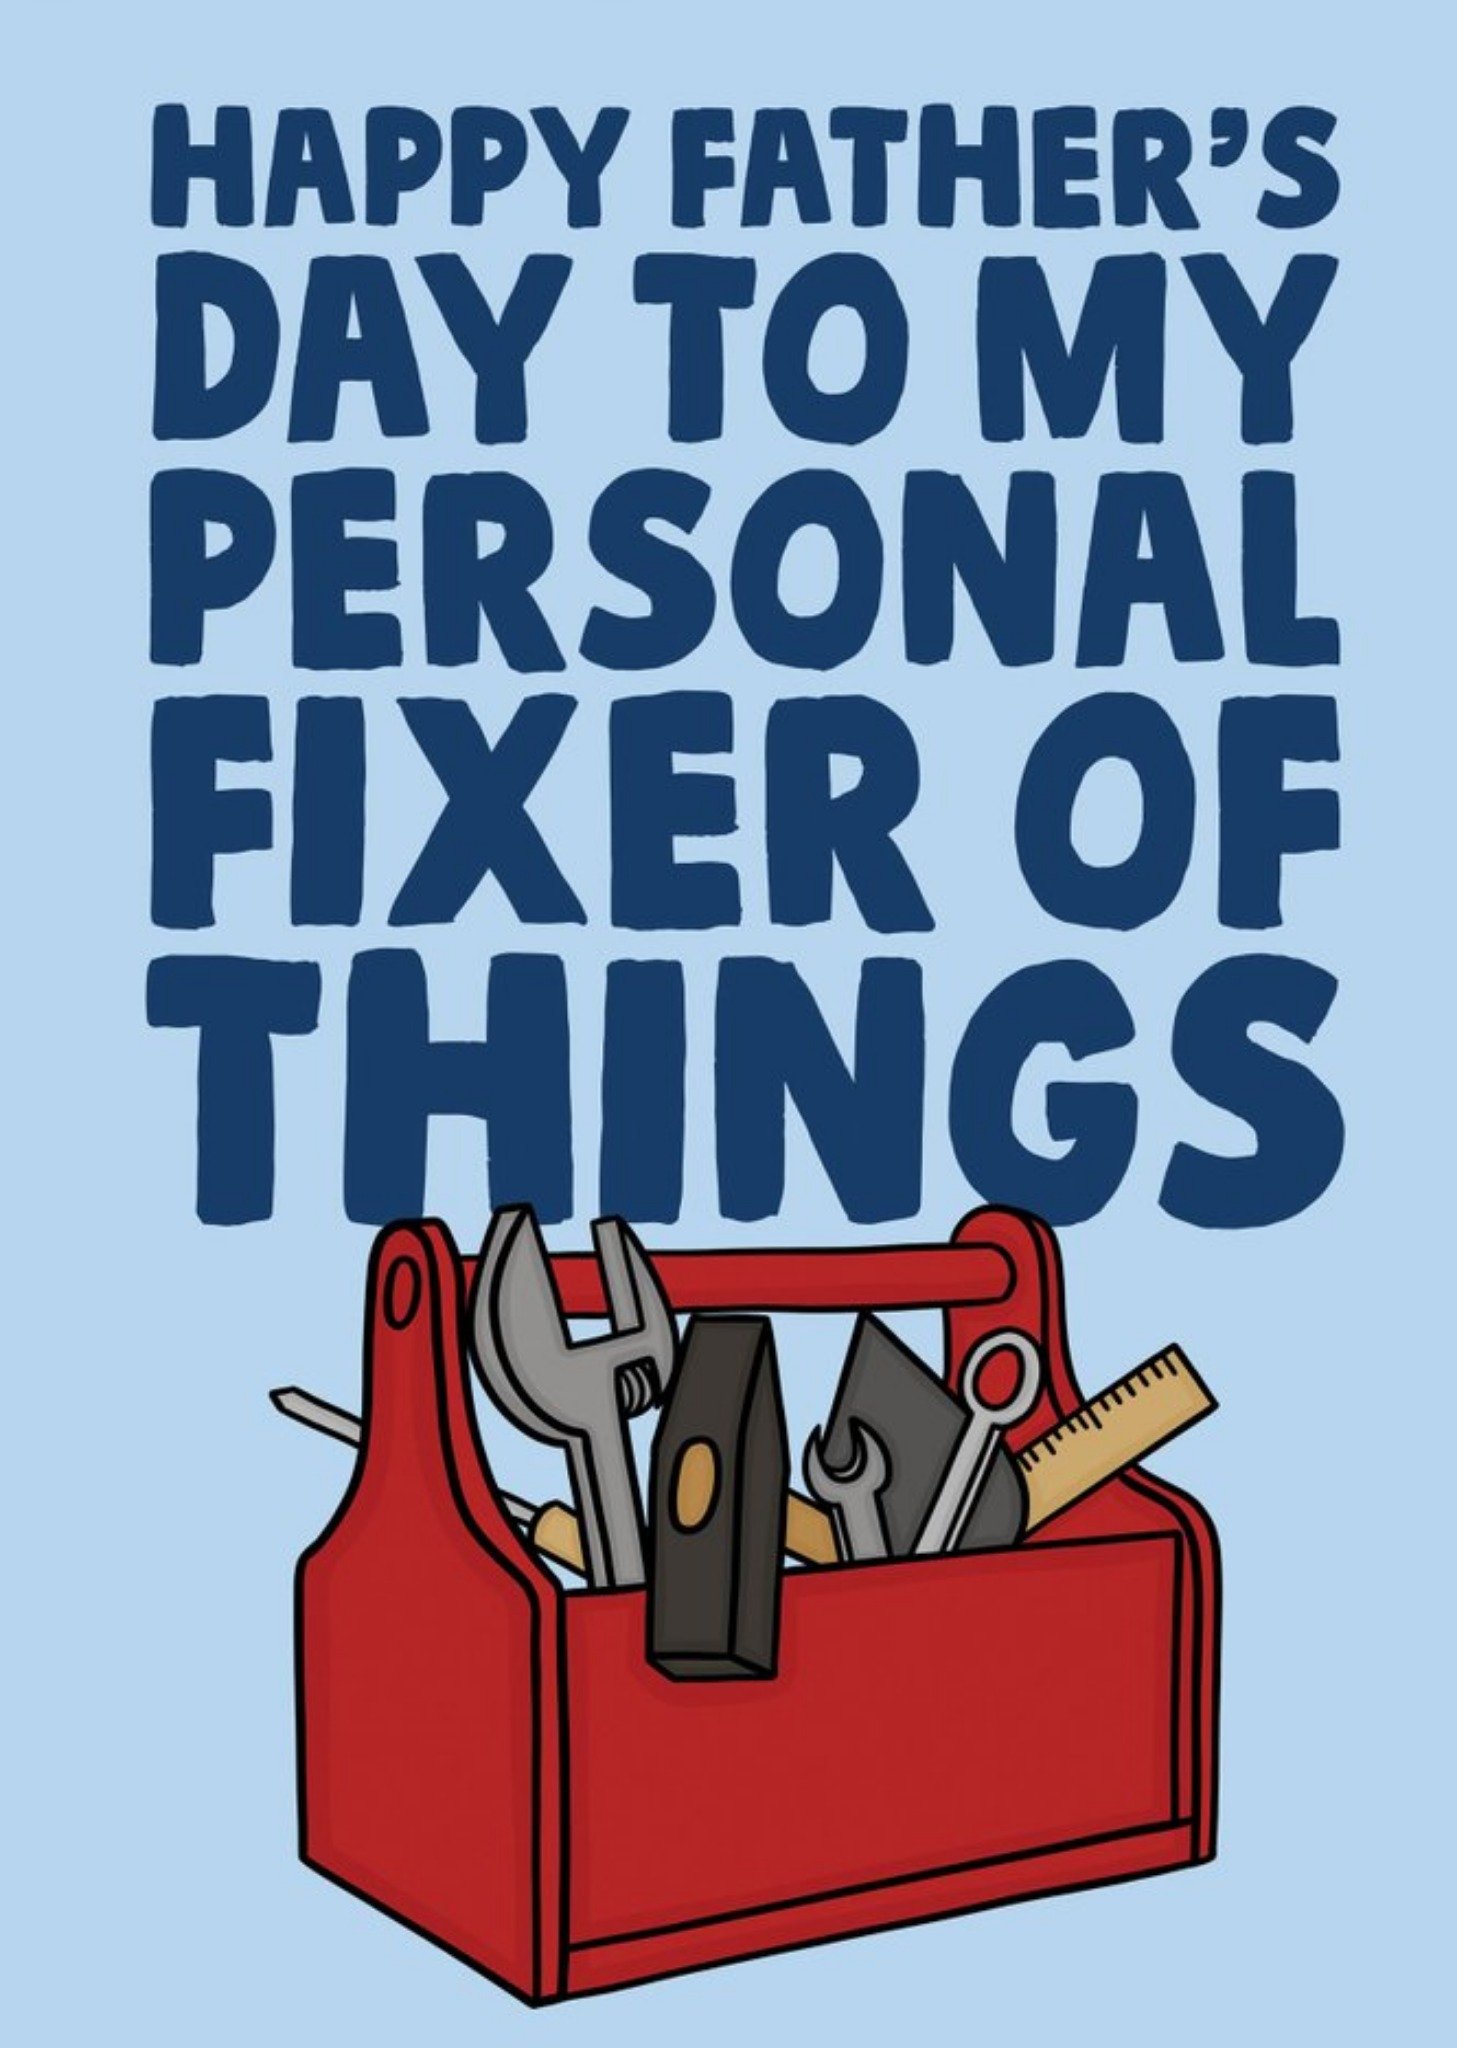 Moonpig Funny Handyman Dad Personal Fixer Of Things Father's Day Card Ecard